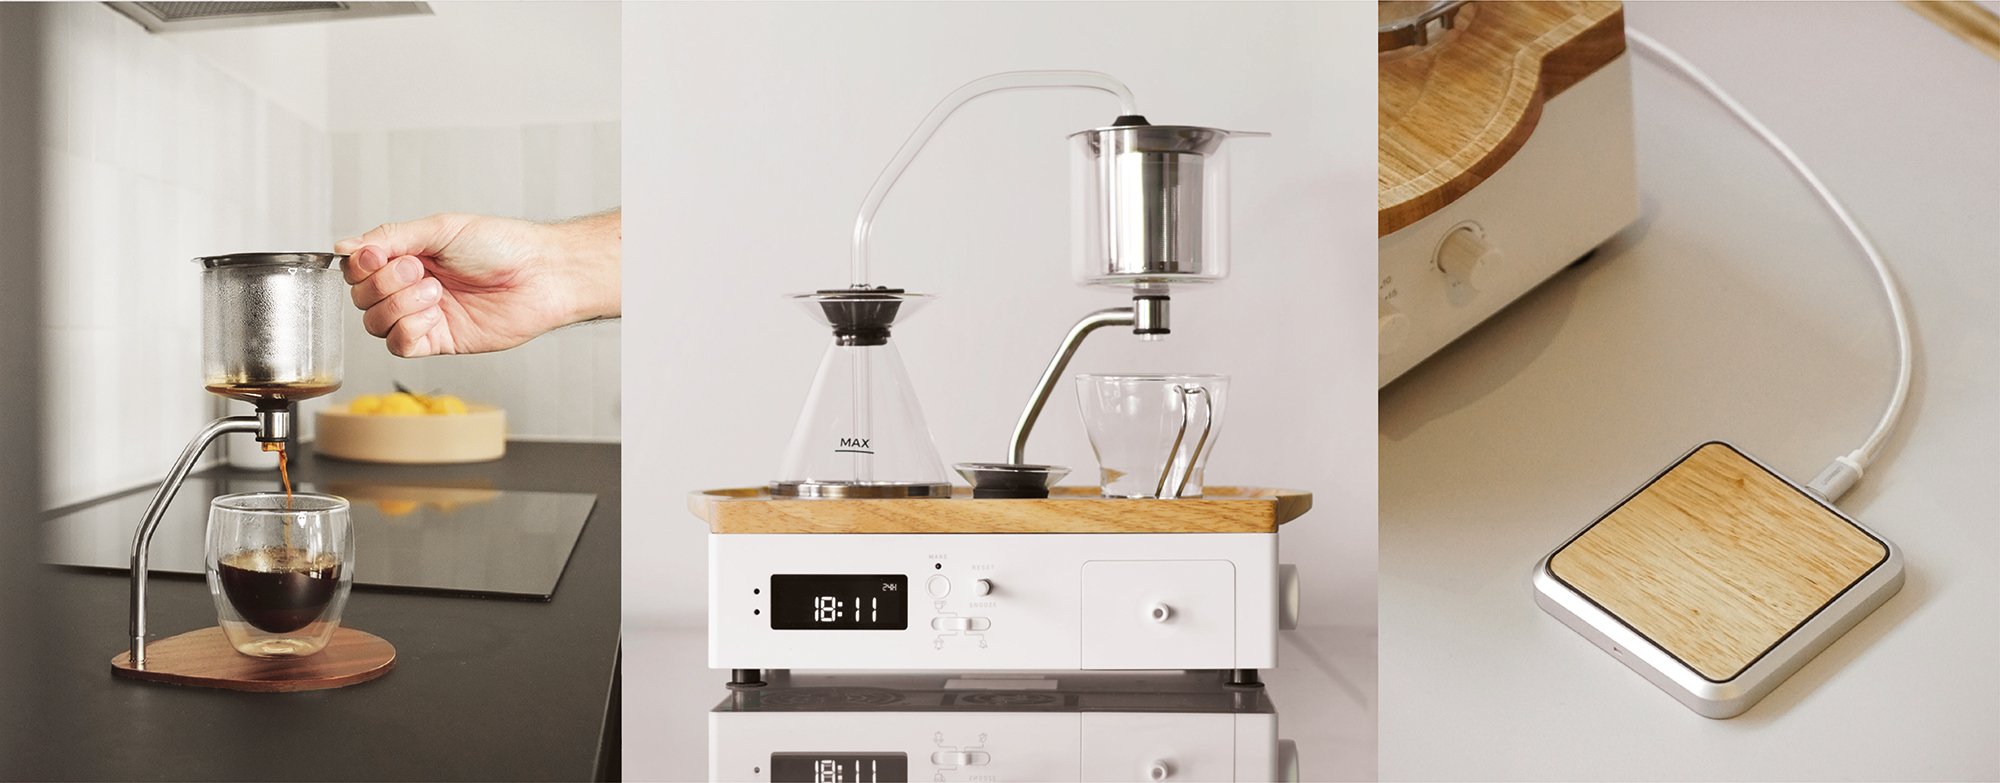 https://citymagazine.si/en/barisieur-2-0-alarm-clock-that-makes-us-coffee-or-tea-and-recharges-the-device/3_products-04_2560x/